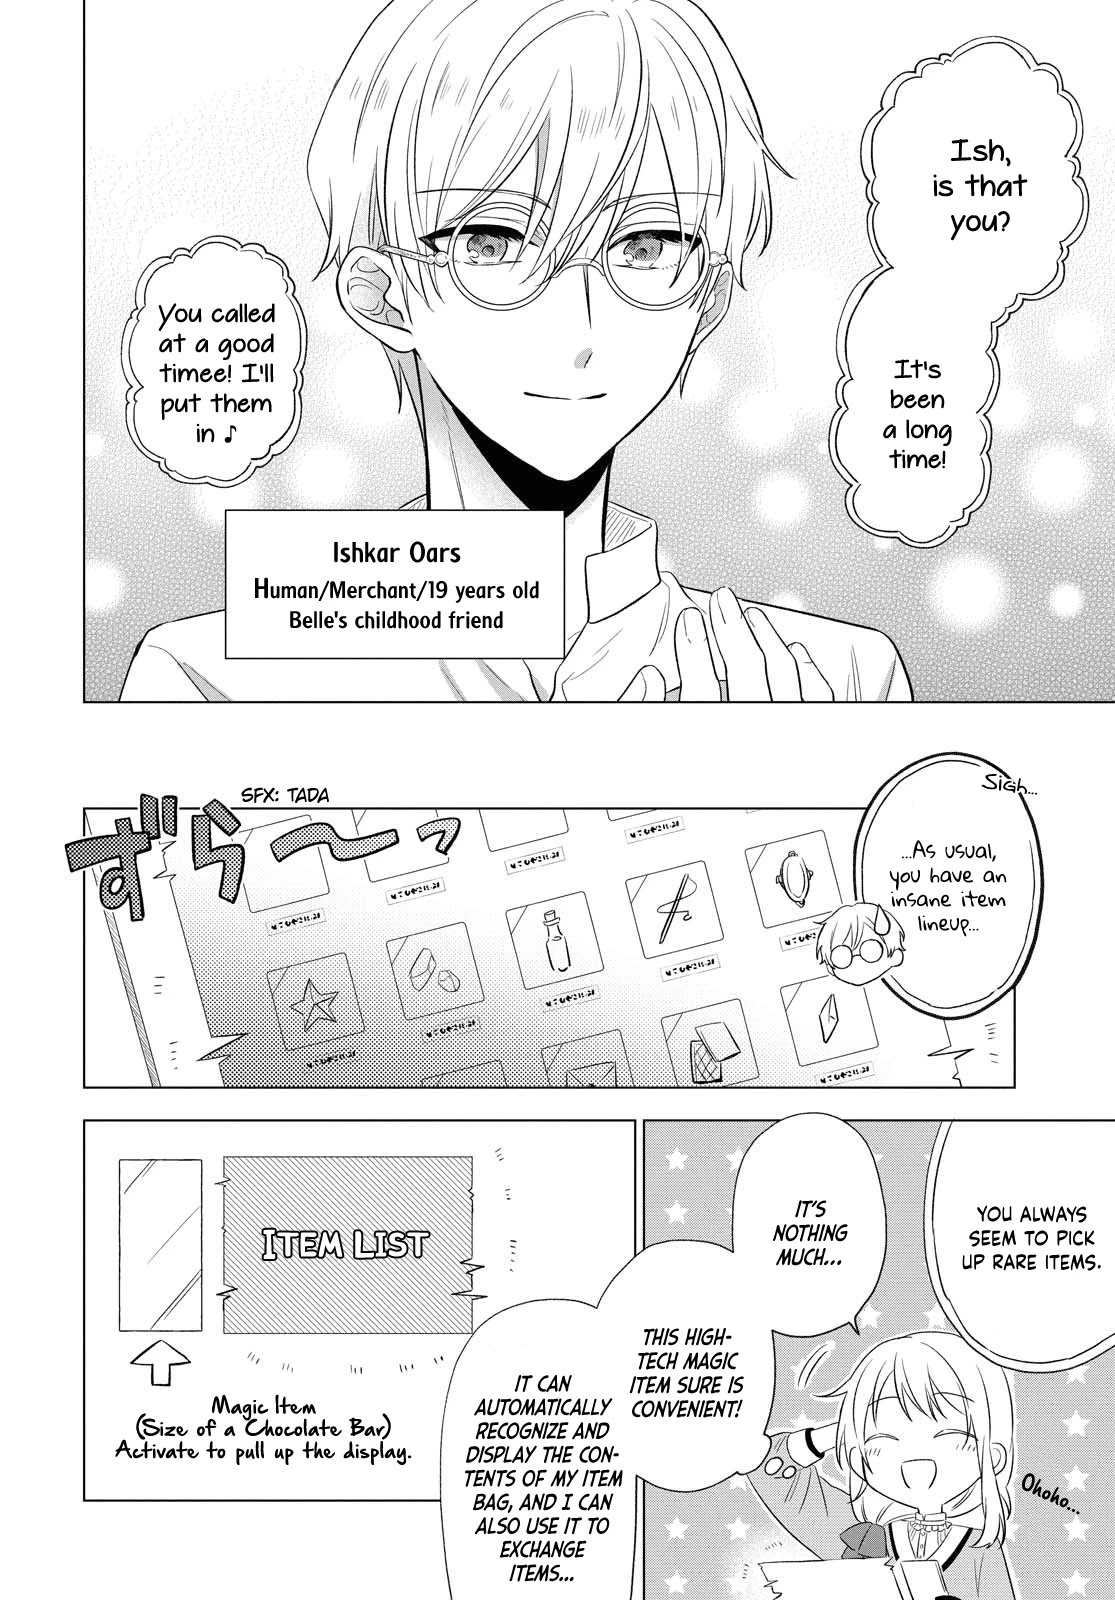 I Want To Become The Hero's Bride (￣∇￣)ゞ - Page 2